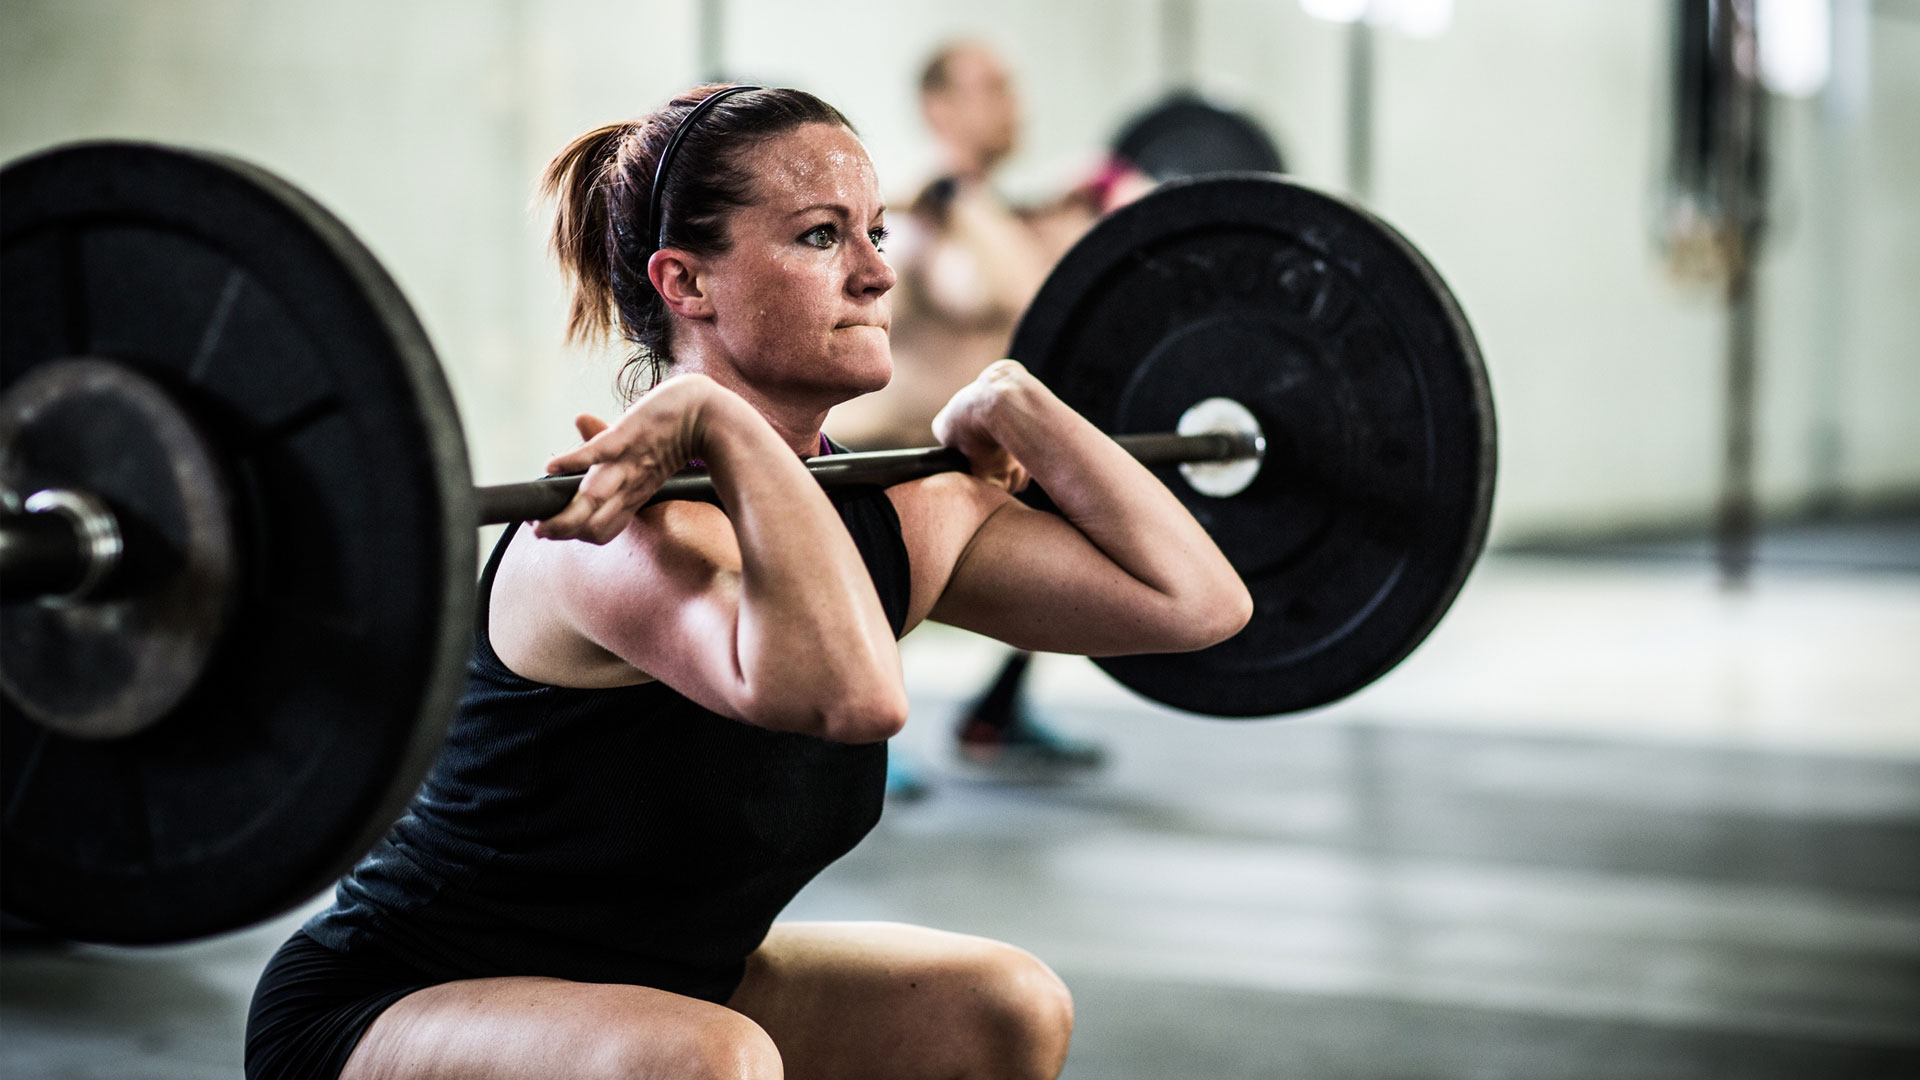 How to get stronger: Image shows woman lifting weights.